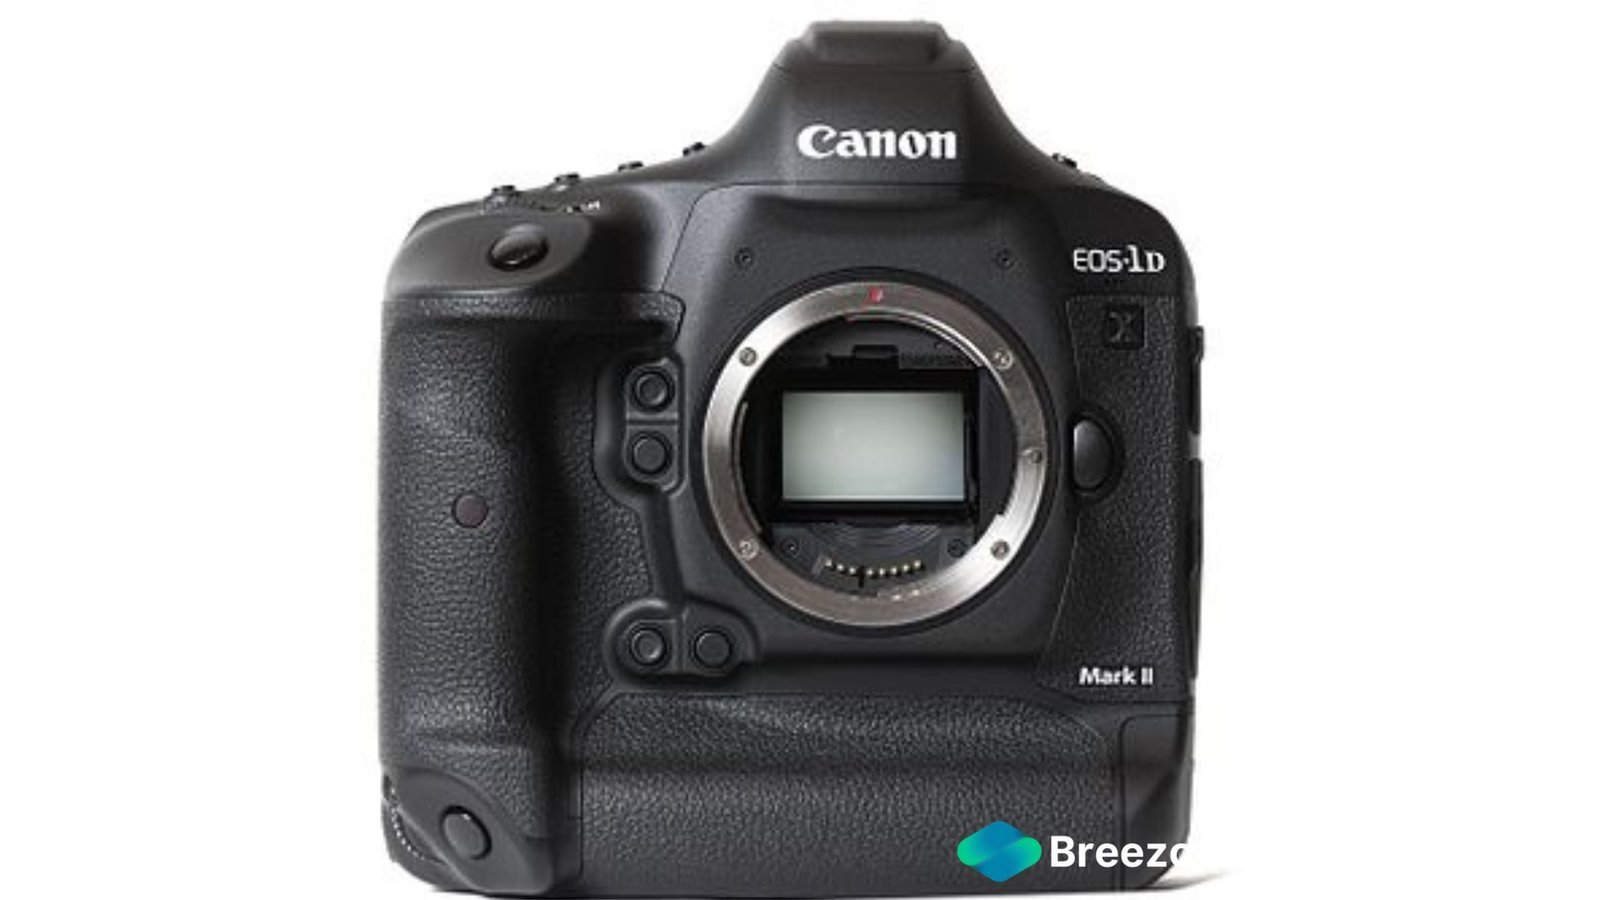 Rent Canon EOS-1D X Mark II Camera Body with Canon lenses Kit in Delhi NCR, Camera accessories, Camera lenses for rent, in Delhi Gurgaon Noida, hire Shooting equipment, Lighting equipment rental, Film gear rental for Video production, camera rental company in Delhi, film equipment rental company